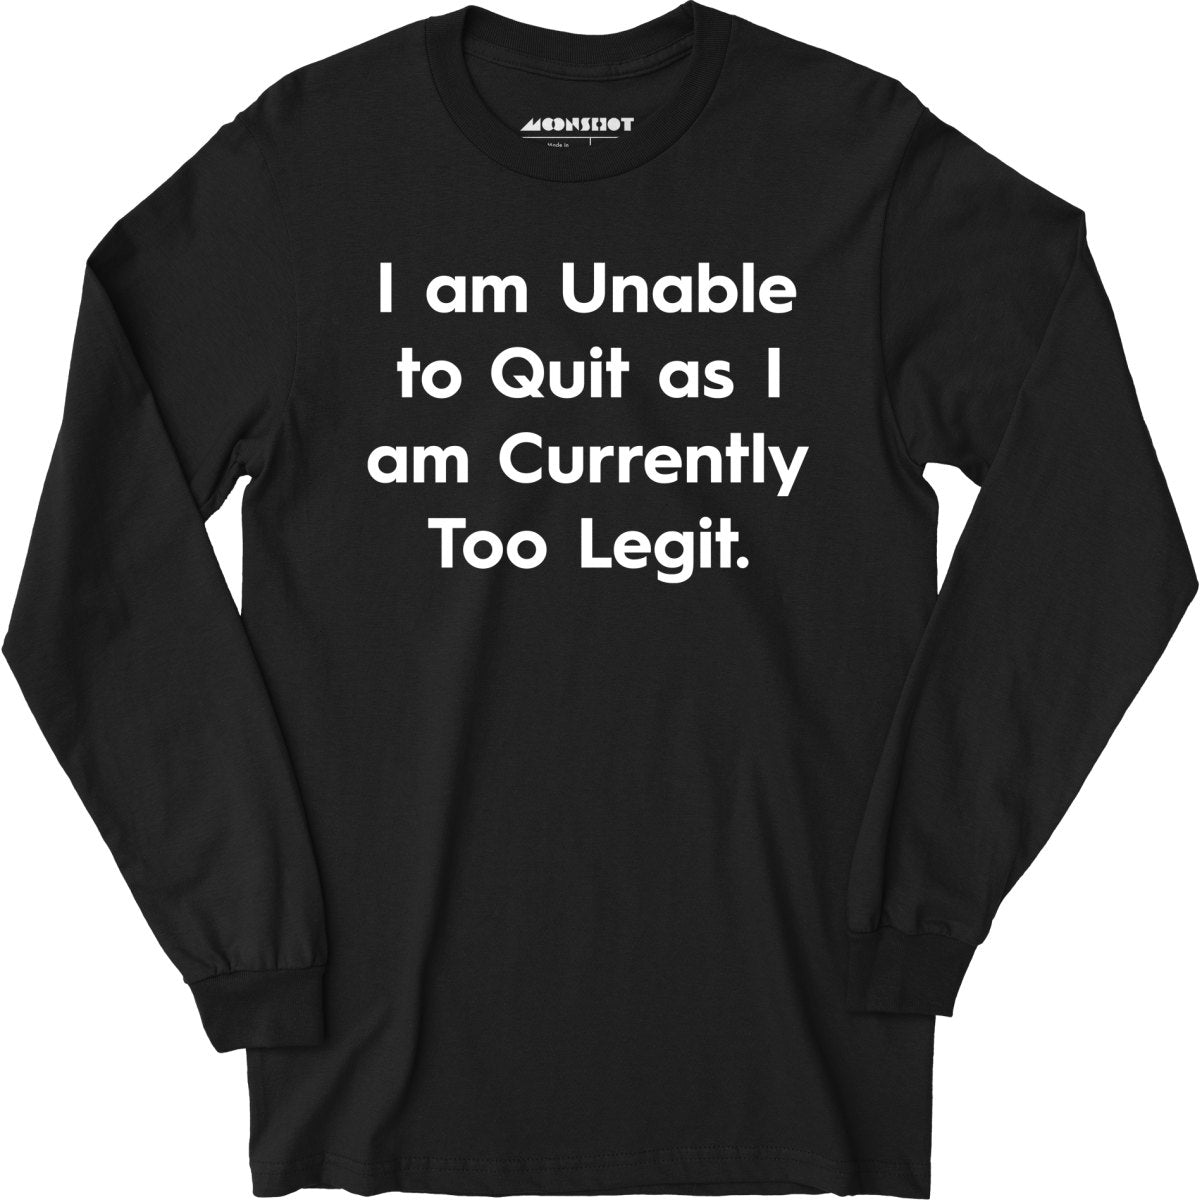 I am Unable to Quit as I am Currently Too Legit - Long Sleeve T-Shirt